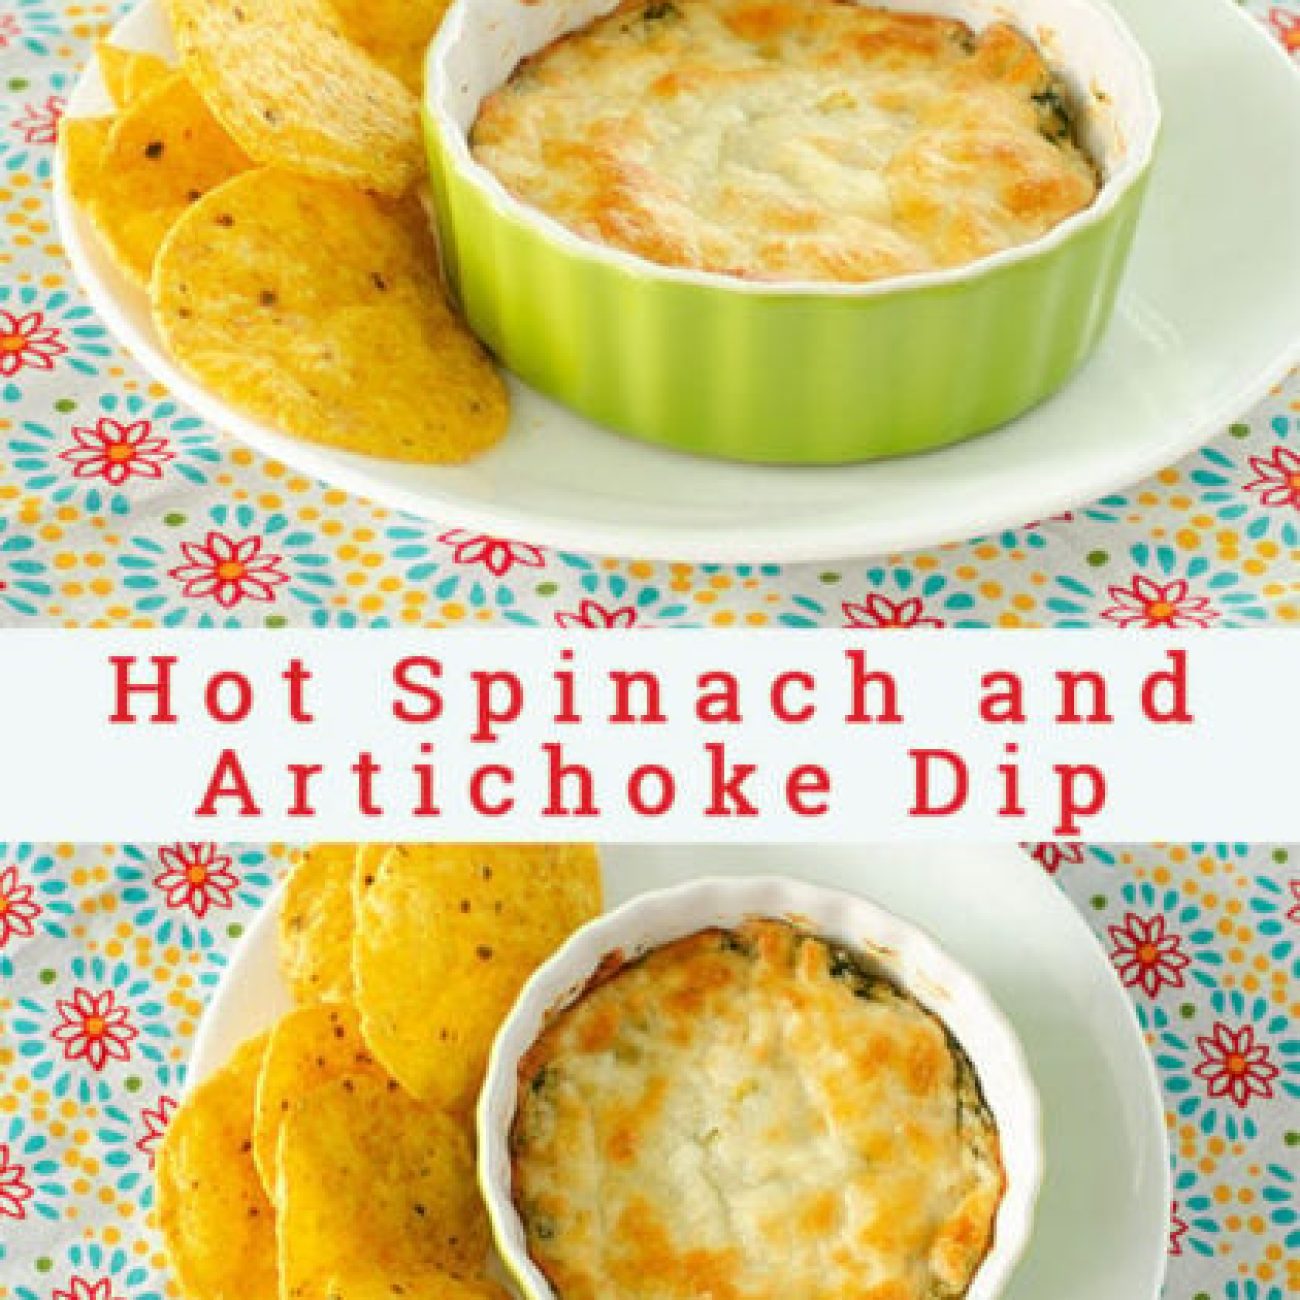 Anthonys Spicy Spinach And Artichoke Dip